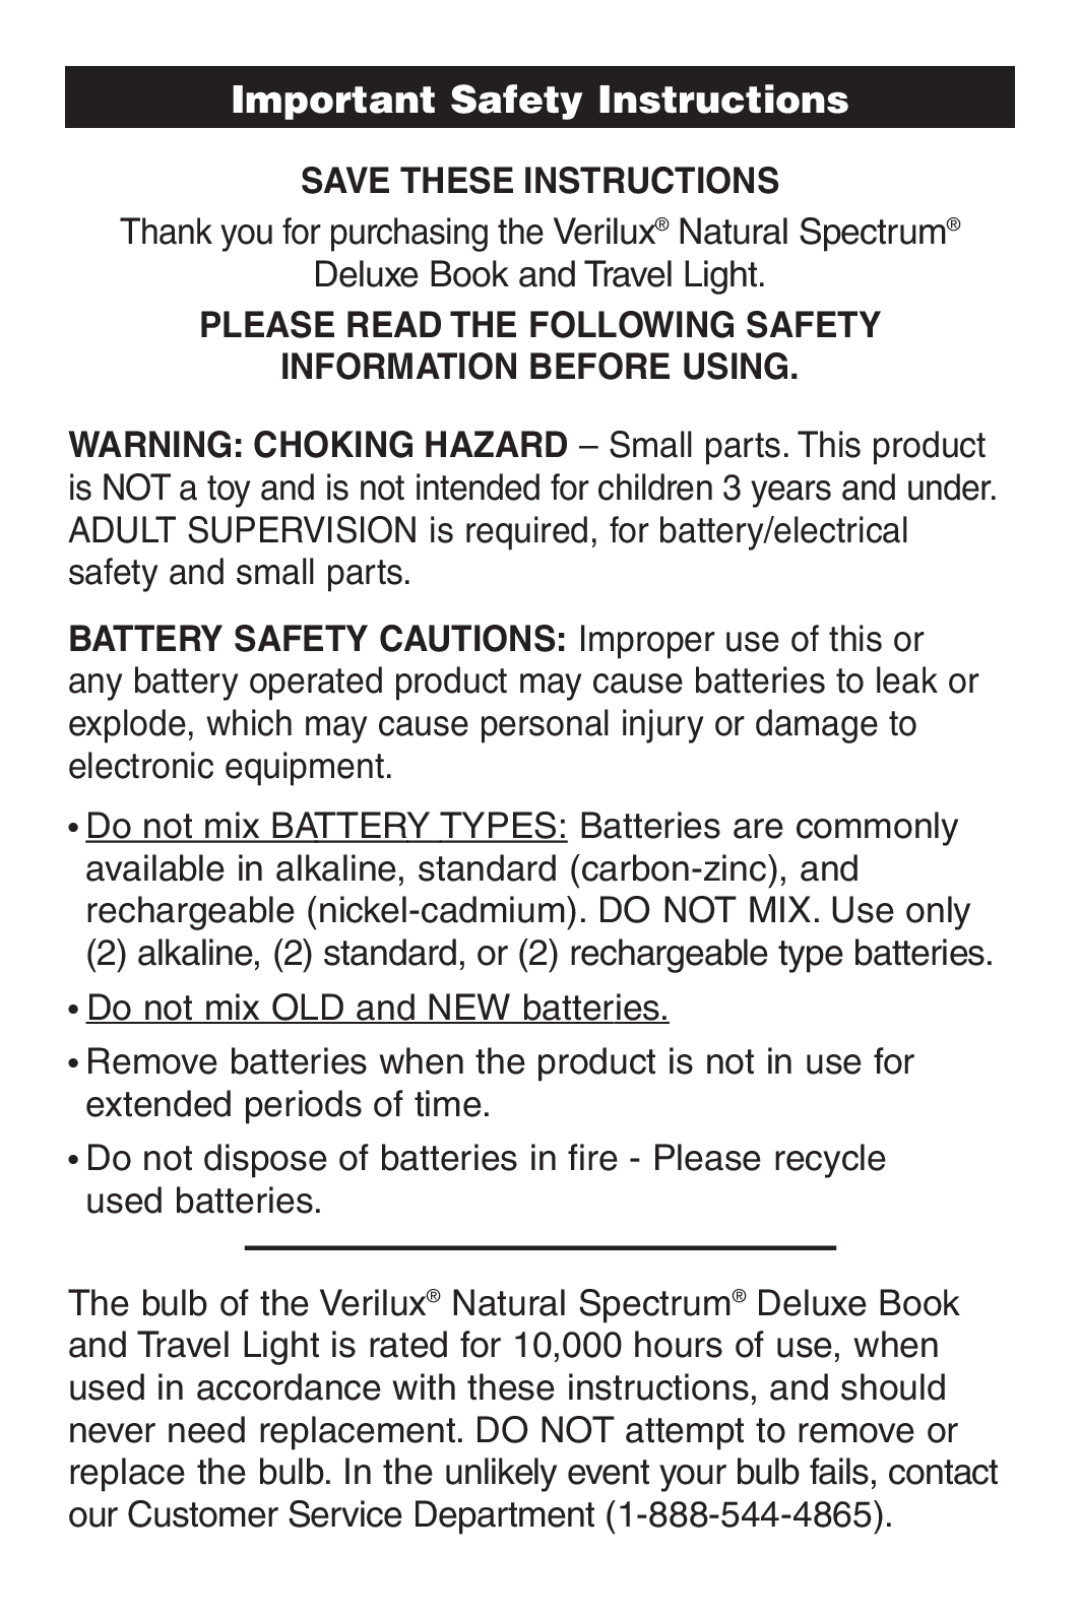 Verilux VB01 manual Important Safety Instructions, Save These Instructions 